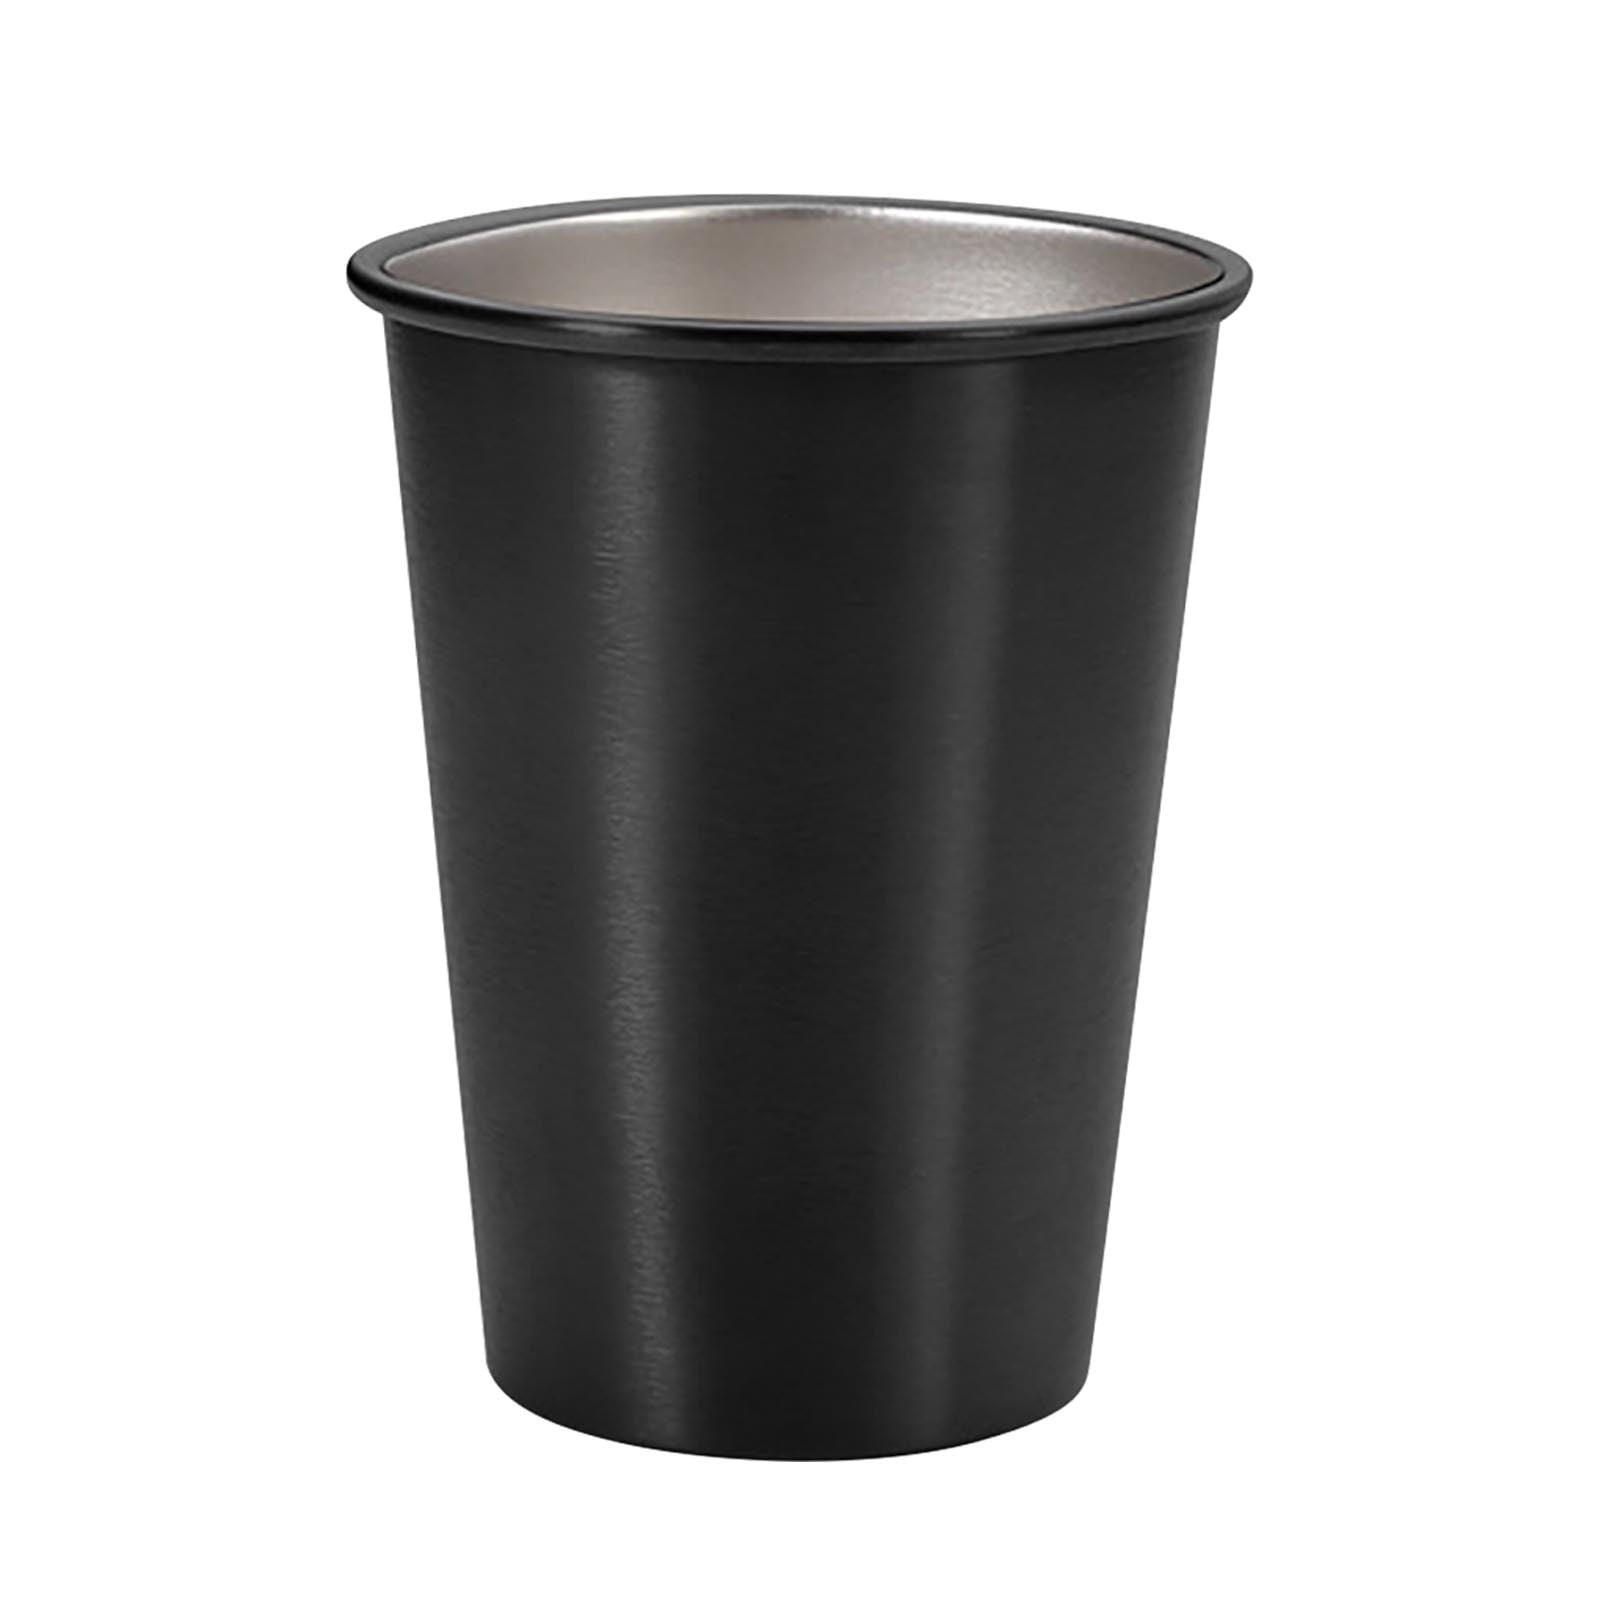 Buy Clean, Disposable and Hygienic Yeti Cup 